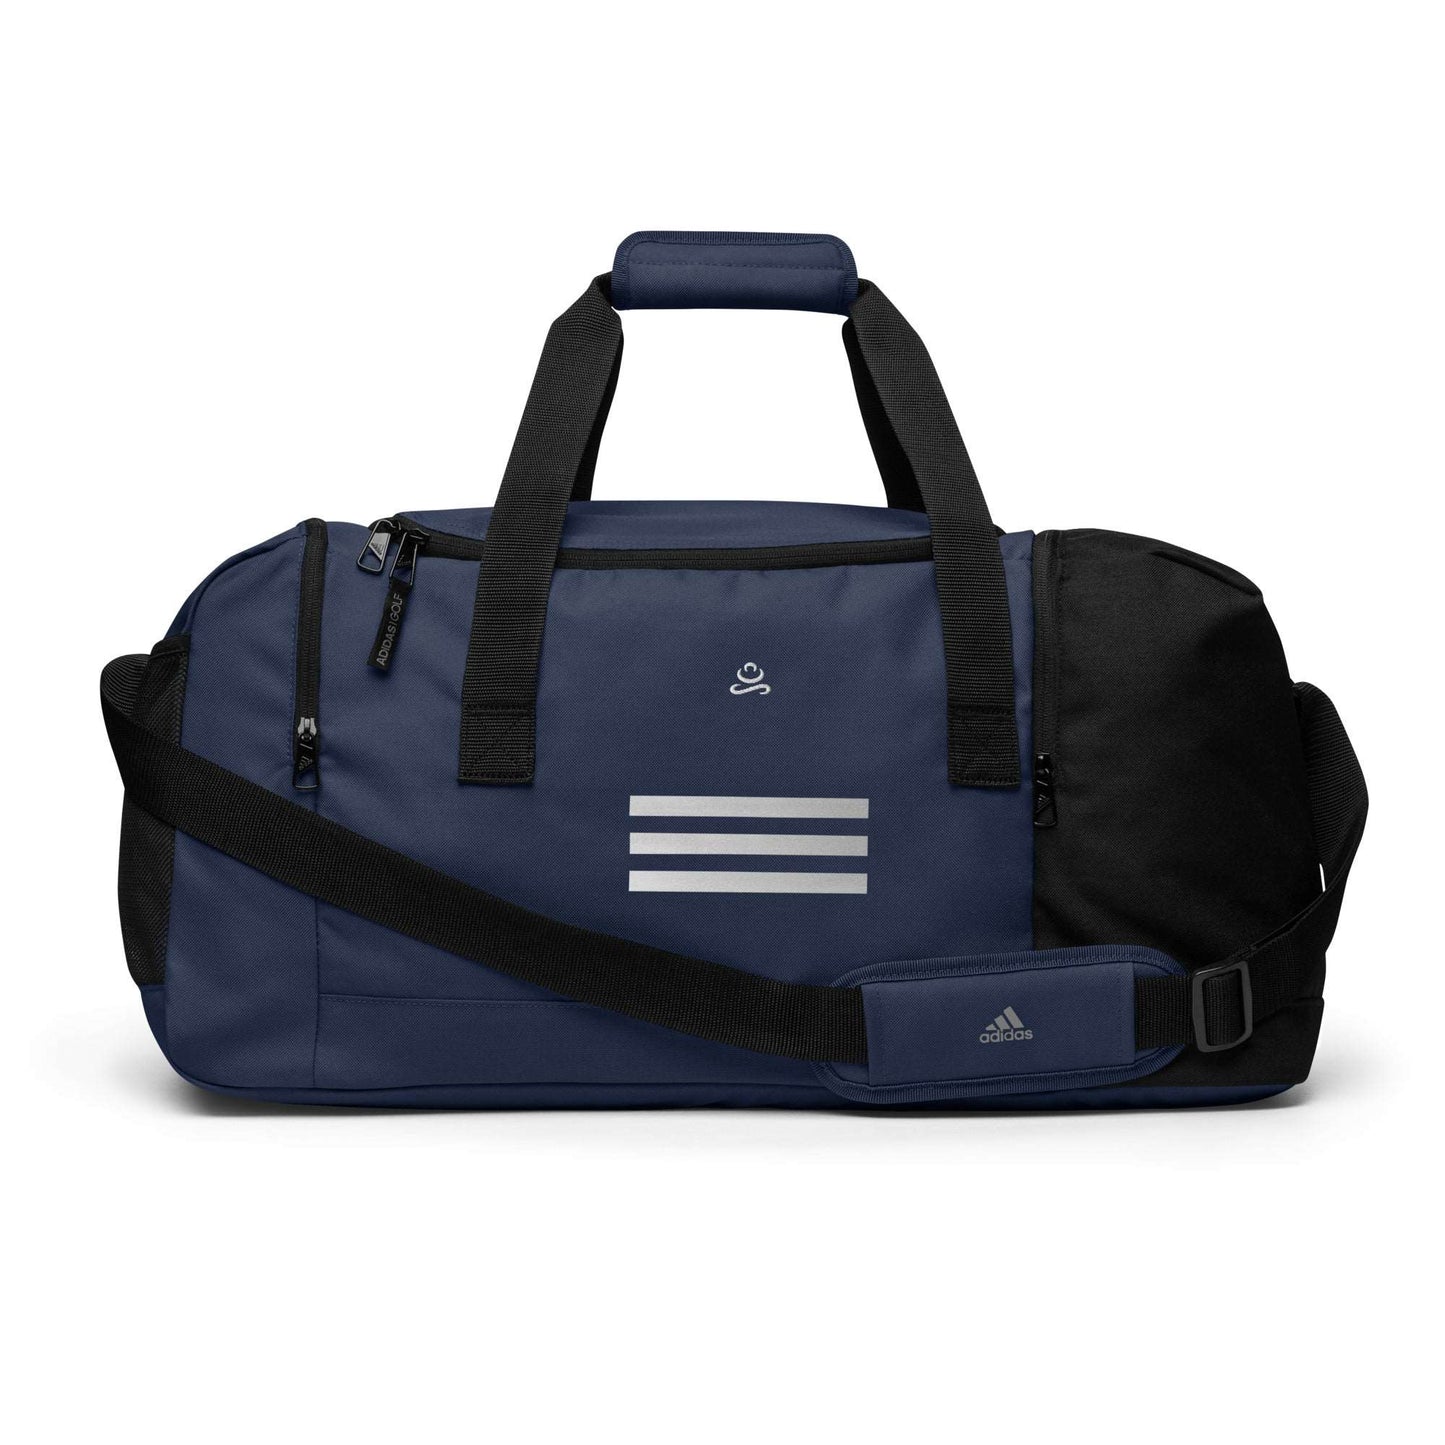 Limited Edition Jain/adidas duffle bag exclusive at Jain Yoga only